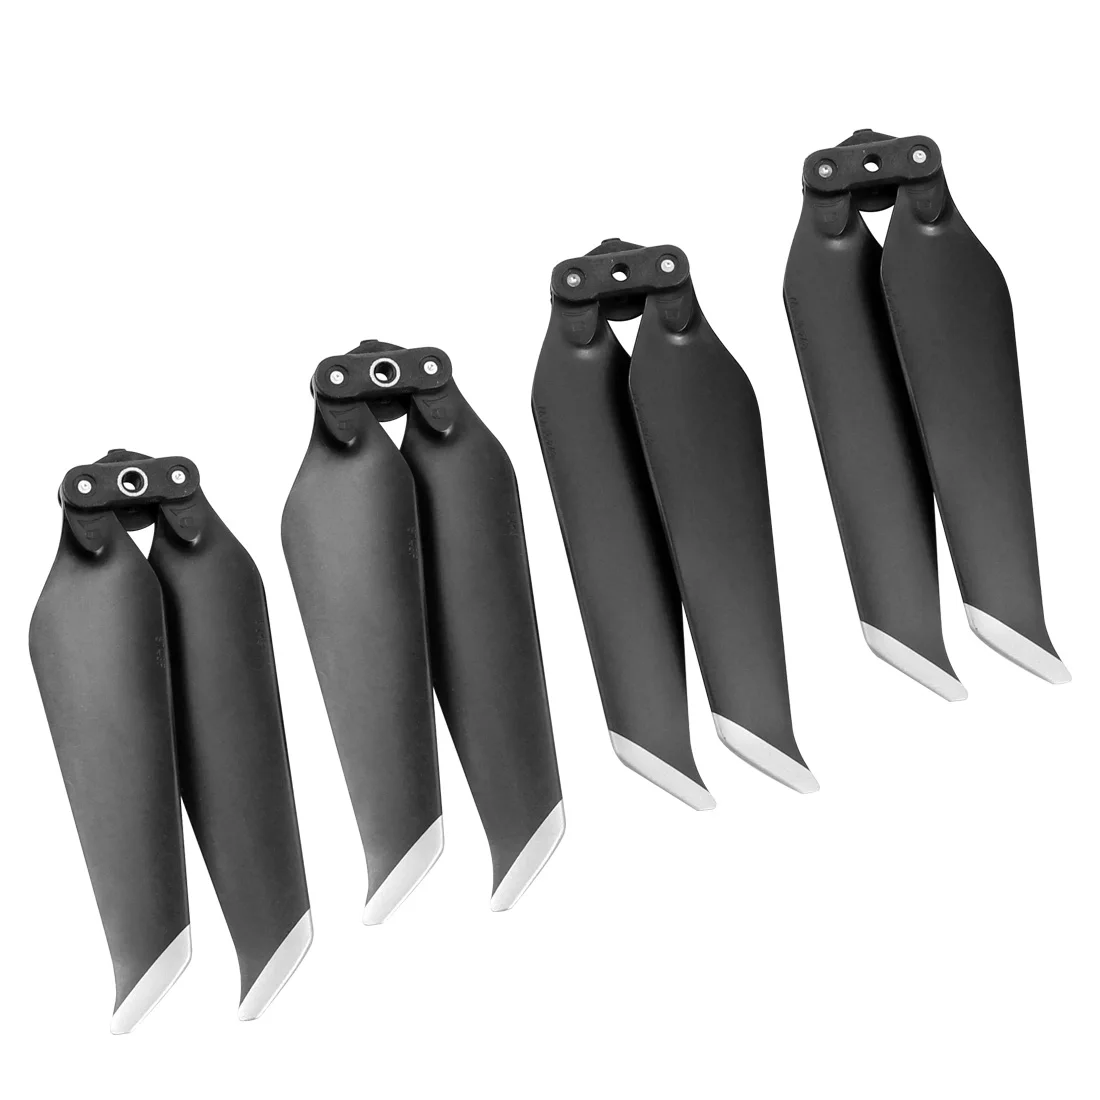 

4pcs 8743 CW CCW Propeller 8743F Low-Noise Propellers Quick-Release Folded for DJI Mavic 2 Pro & Zoom Quadcopter Prop Accessory